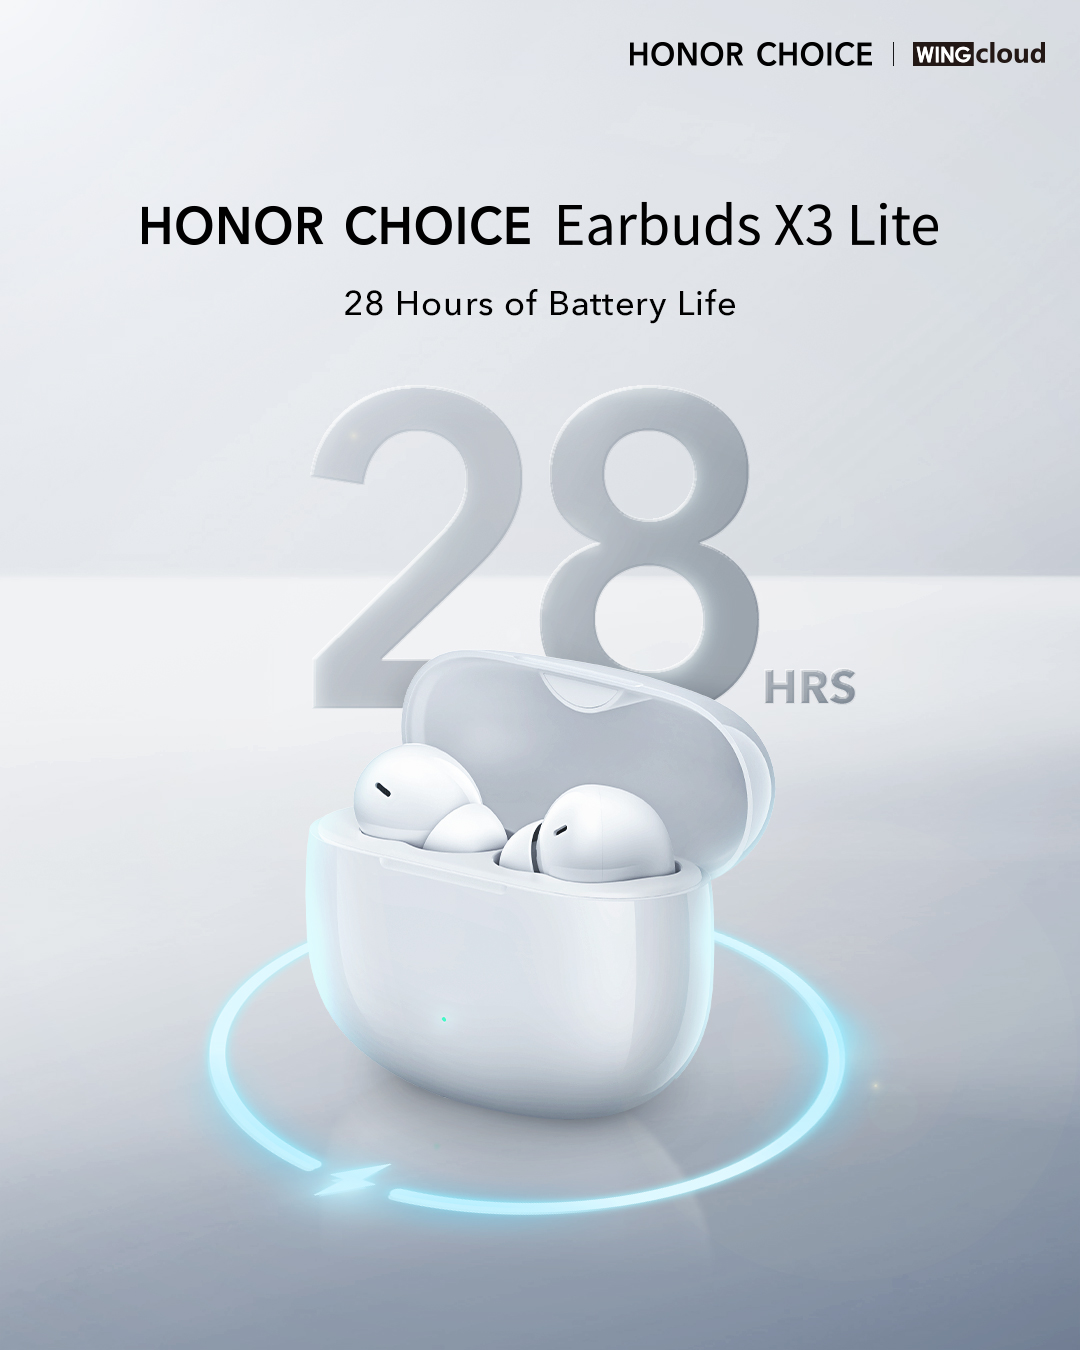 HONOR UK on X: Big news! HONOR CHOICE Earbuds X3 Lite will be